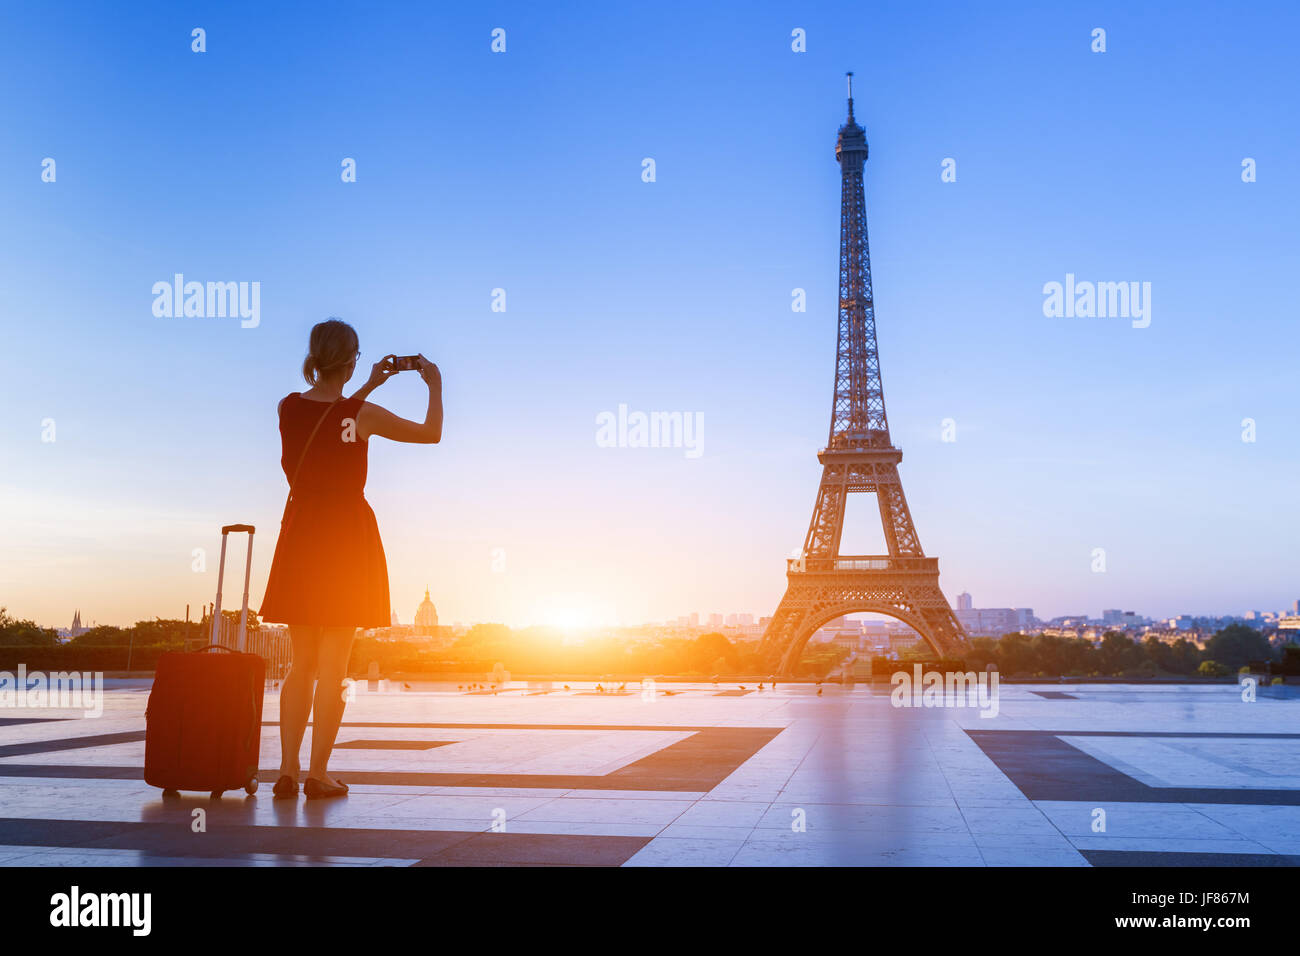 Woman traveler taking a photo of Eiffel Tower from Trocadero with her smartphone during a weekend trip to Paris, France Stock Photo